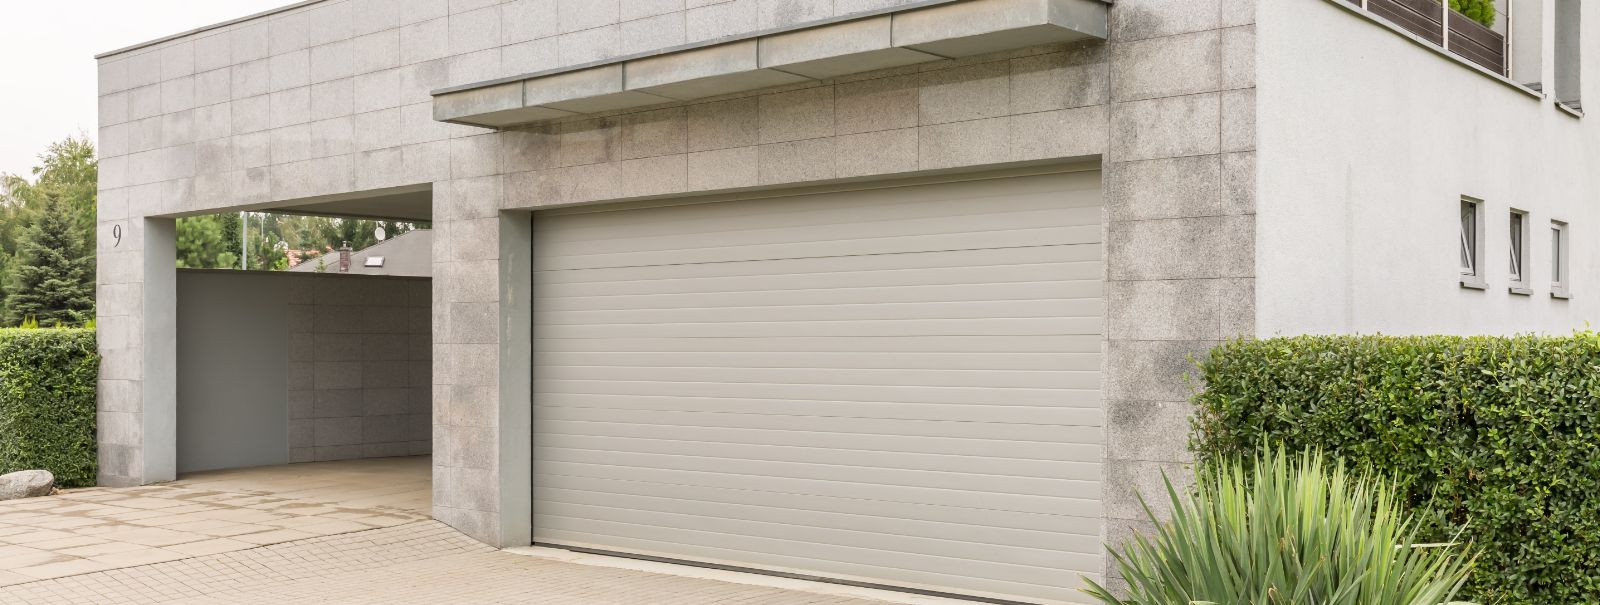 Industrial doors have come a long way from the simple, manually operated barriers of the past. Today, they are complex systems that play a critical role in the 